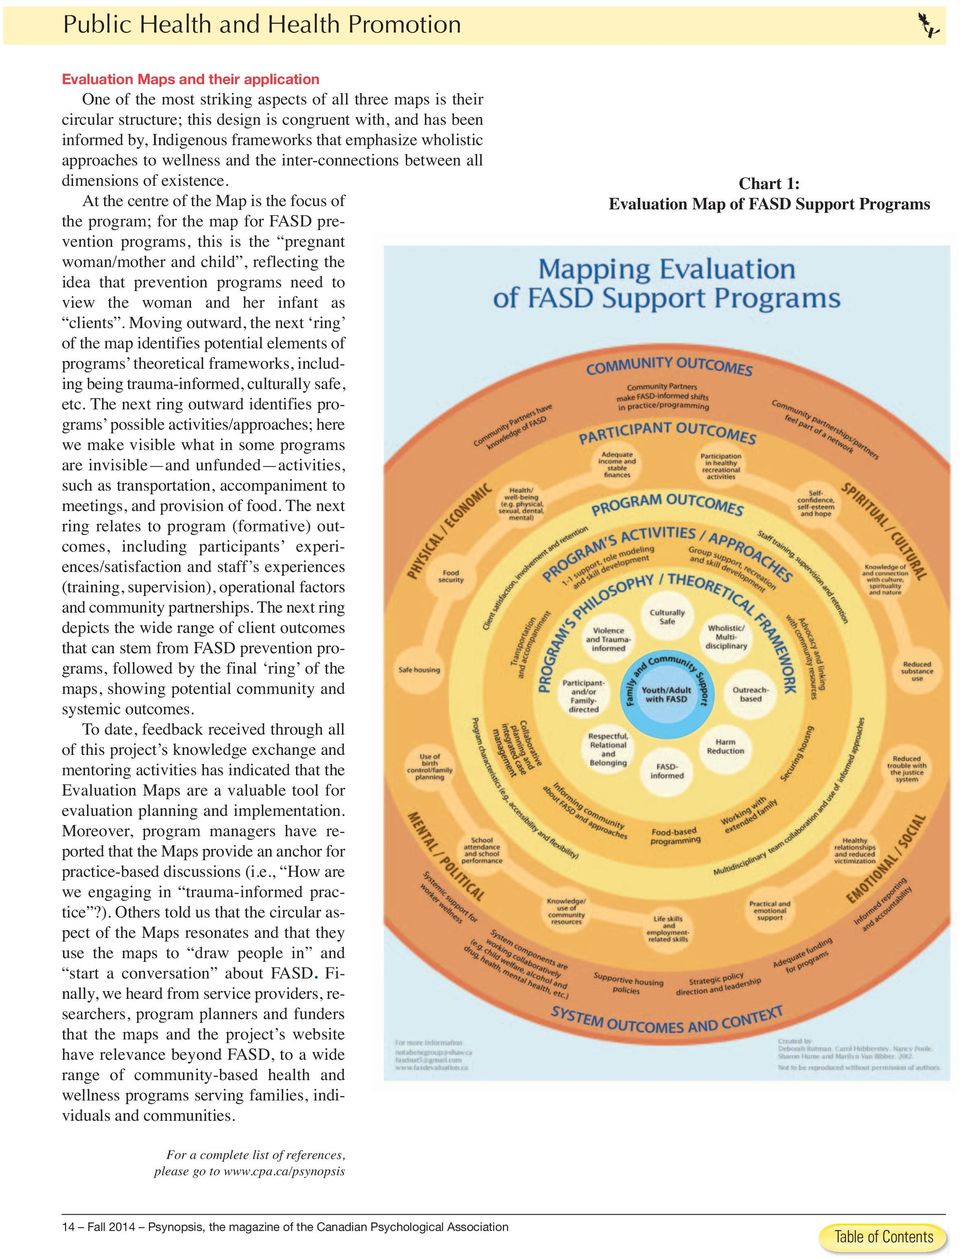 At the centre of the Map is the focus of the program; for the map for FASD prevention programs, this is the pregnant woman/mother and child, reflecting the idea that prevention programs need to view